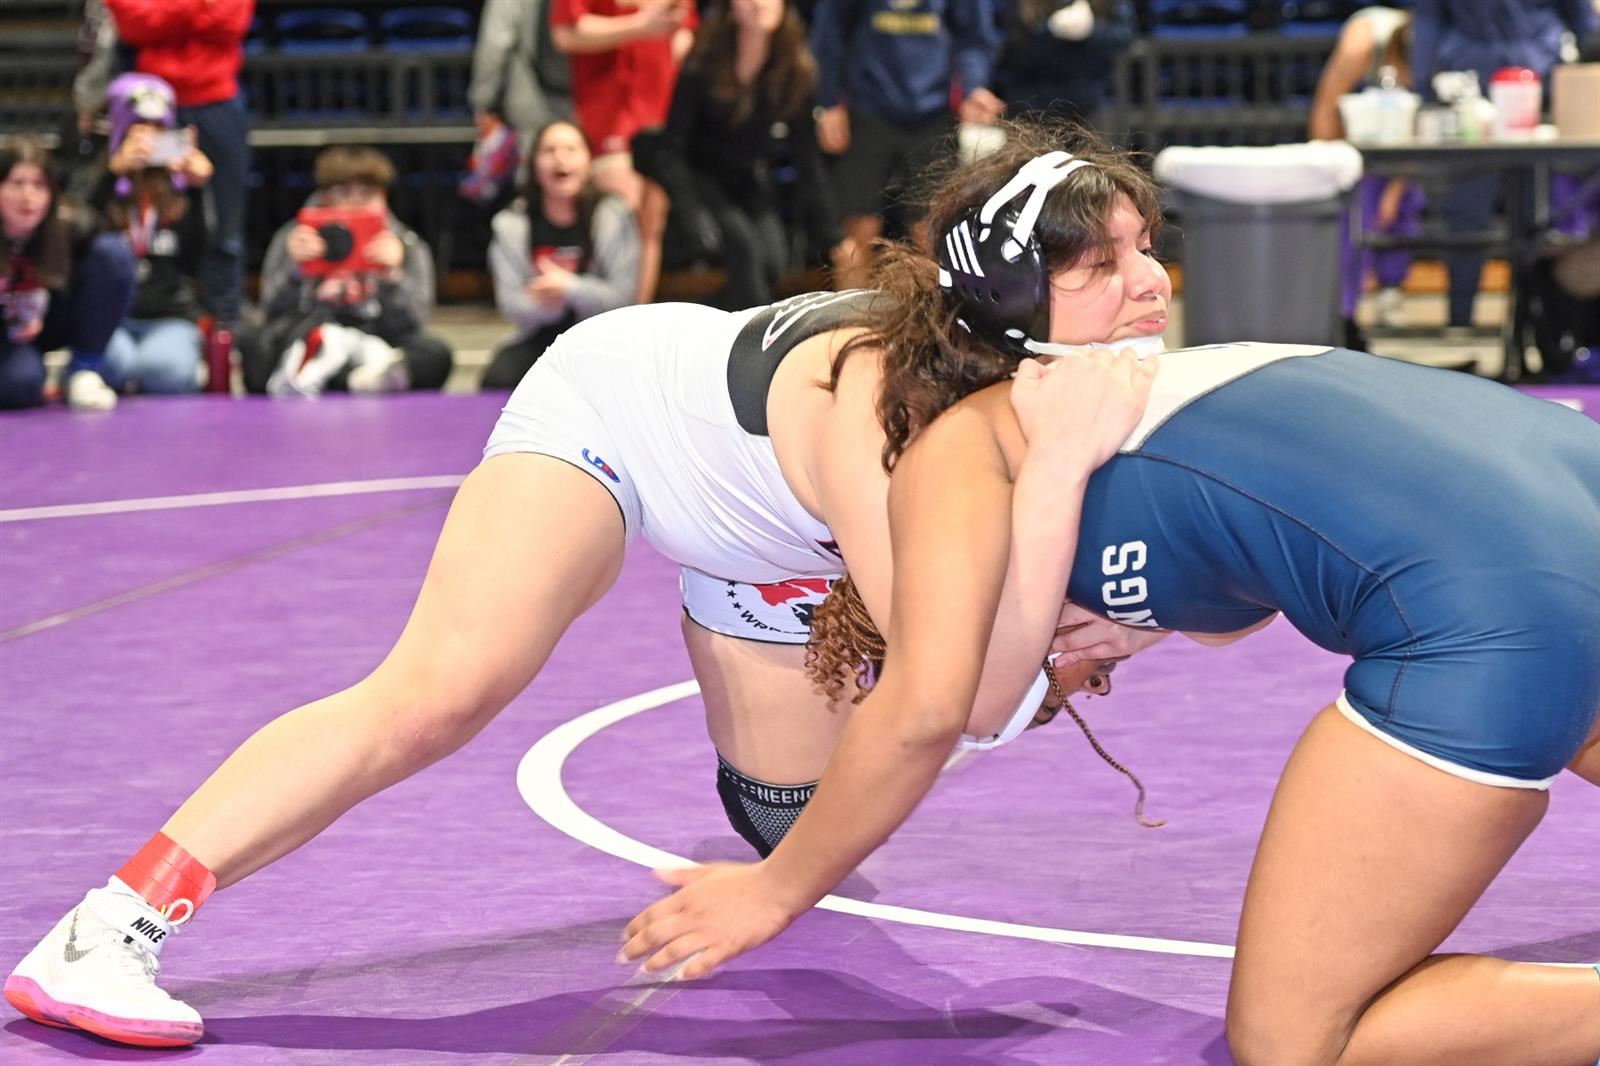 Langham Creek High School sophomore Amy Sorto won the 165-pound girls’ regional title to advance to the state tournament.